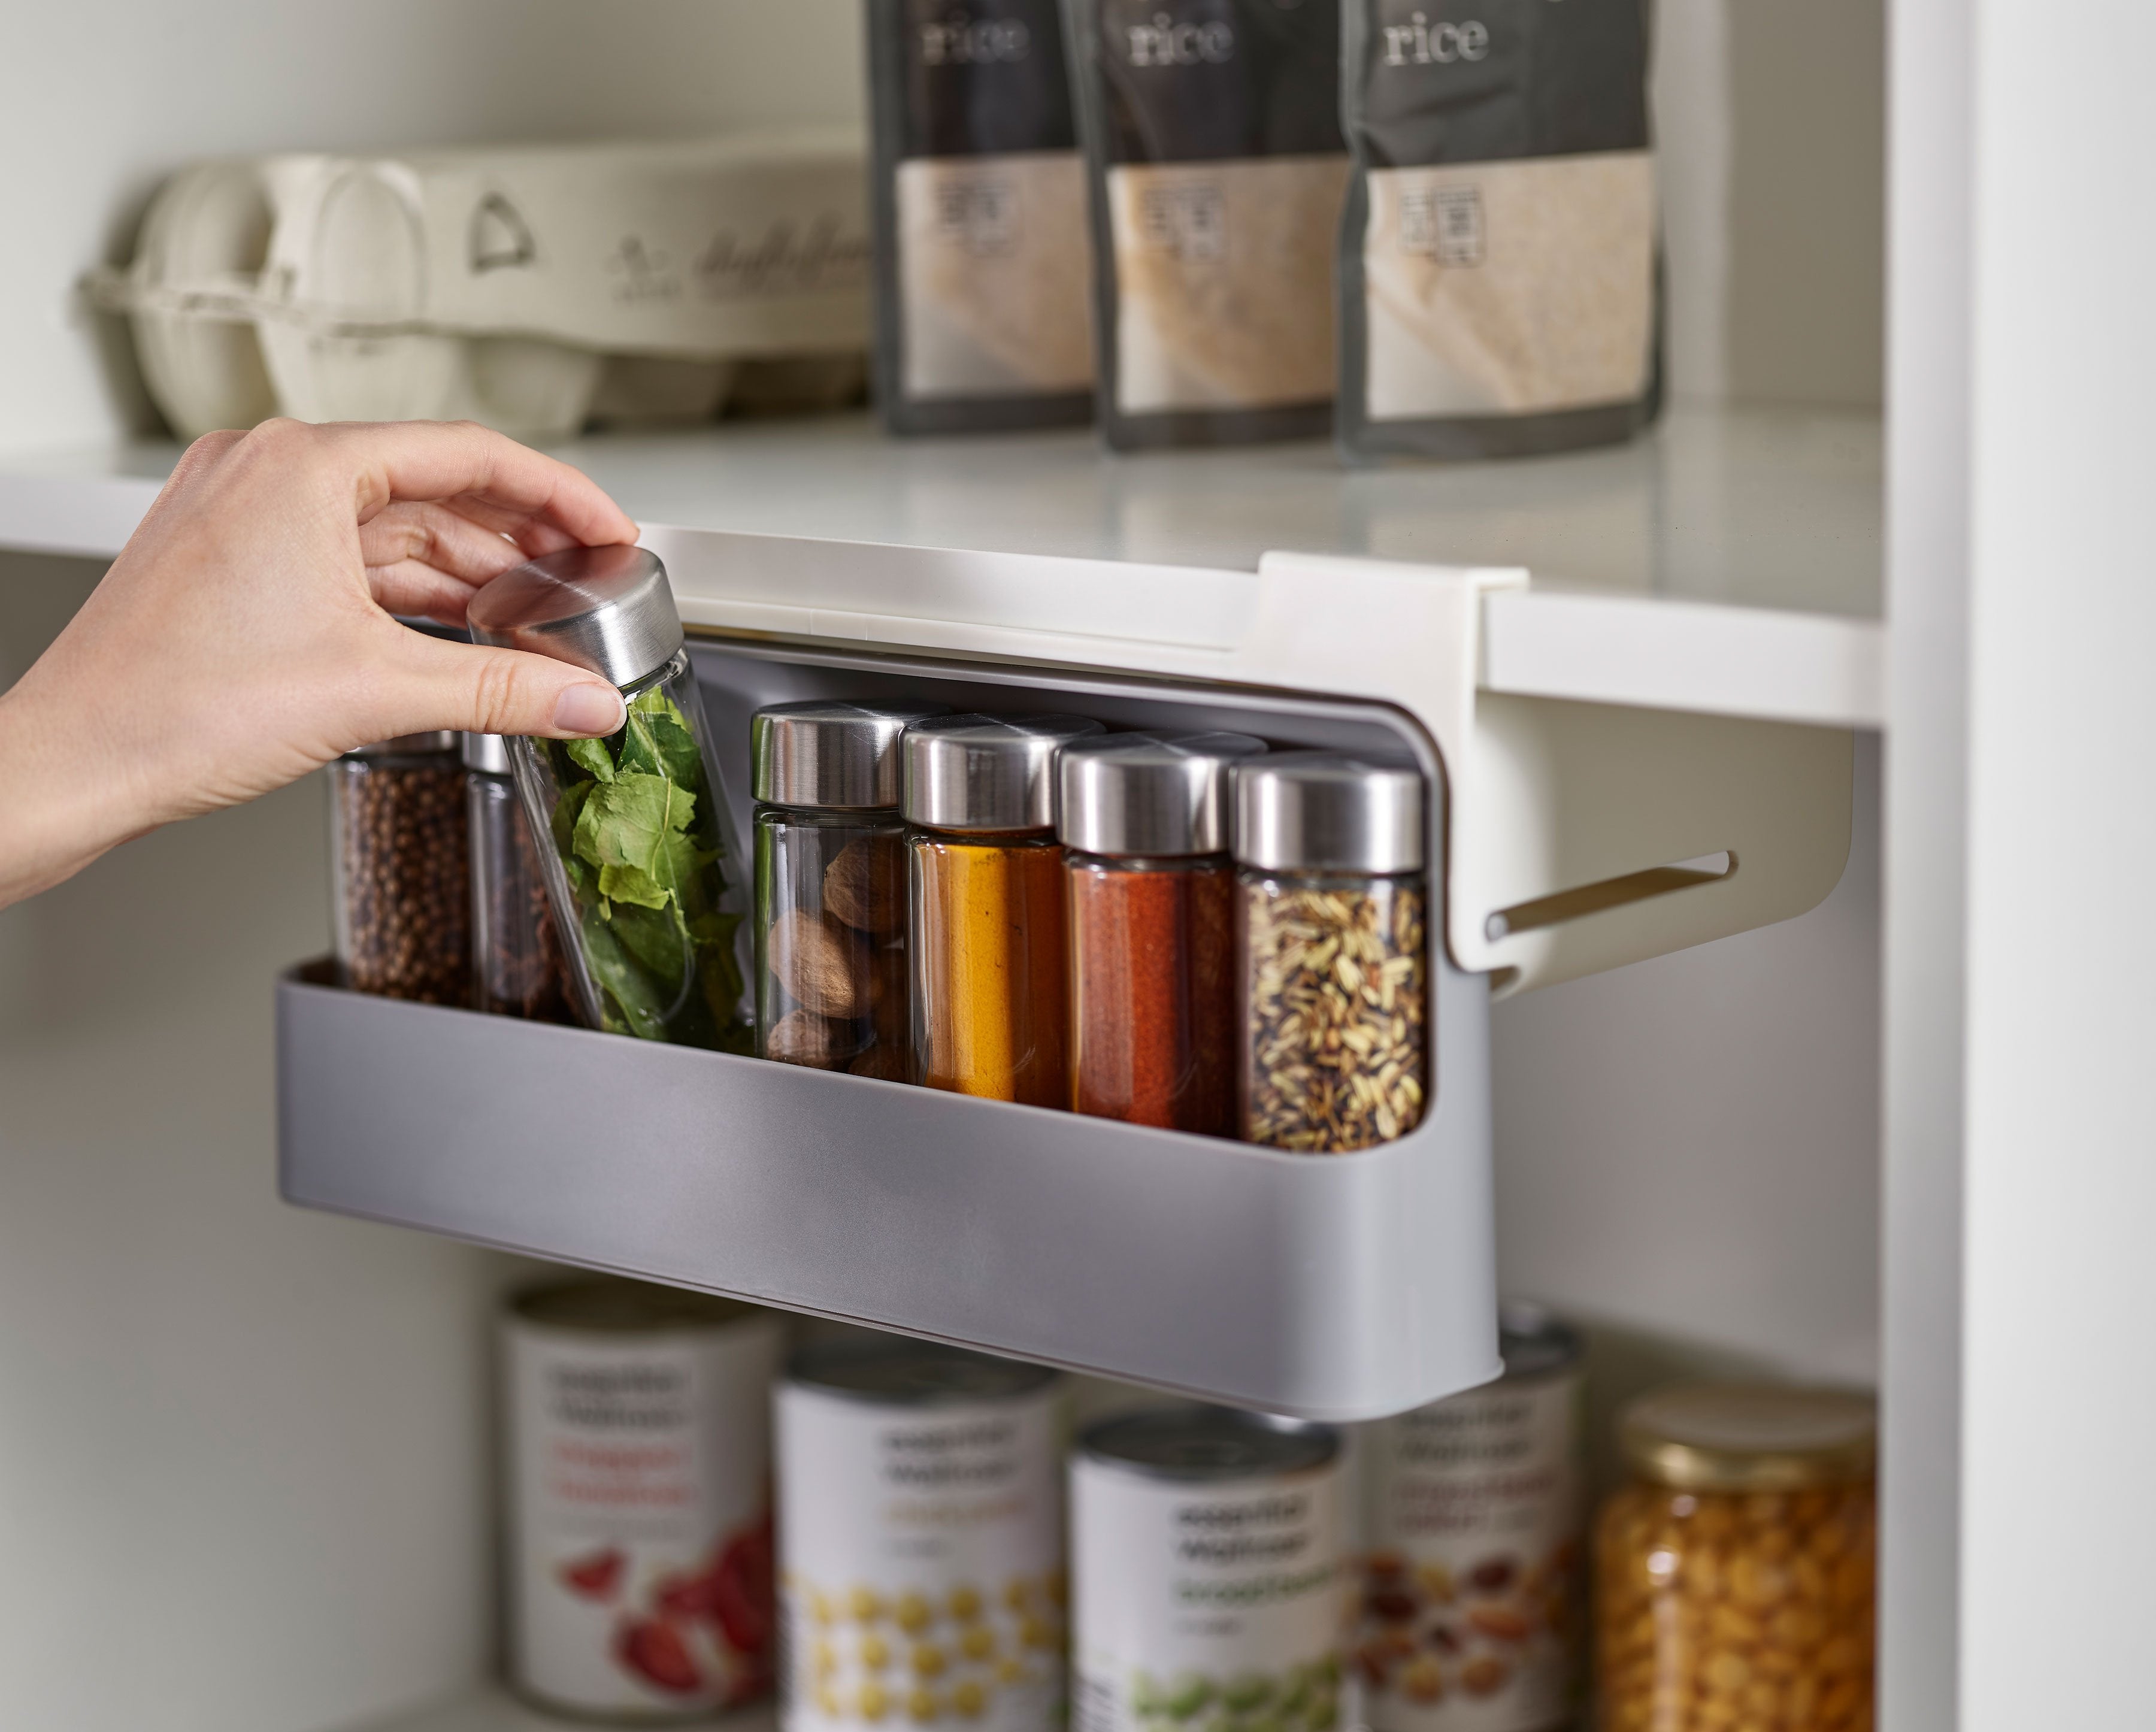 BEON.COM.AU  This innovative design makes use of the space beneath your shelves that would normally go unused with a handy pull-out compartment that holds up to 7 spice jars.  Unique design utilises unused space beneath the shelf Easy pull-out compartment with drawer stop Holds up to 7 standard spice jars (j... Joseph Joseph at BEON.COM.AU